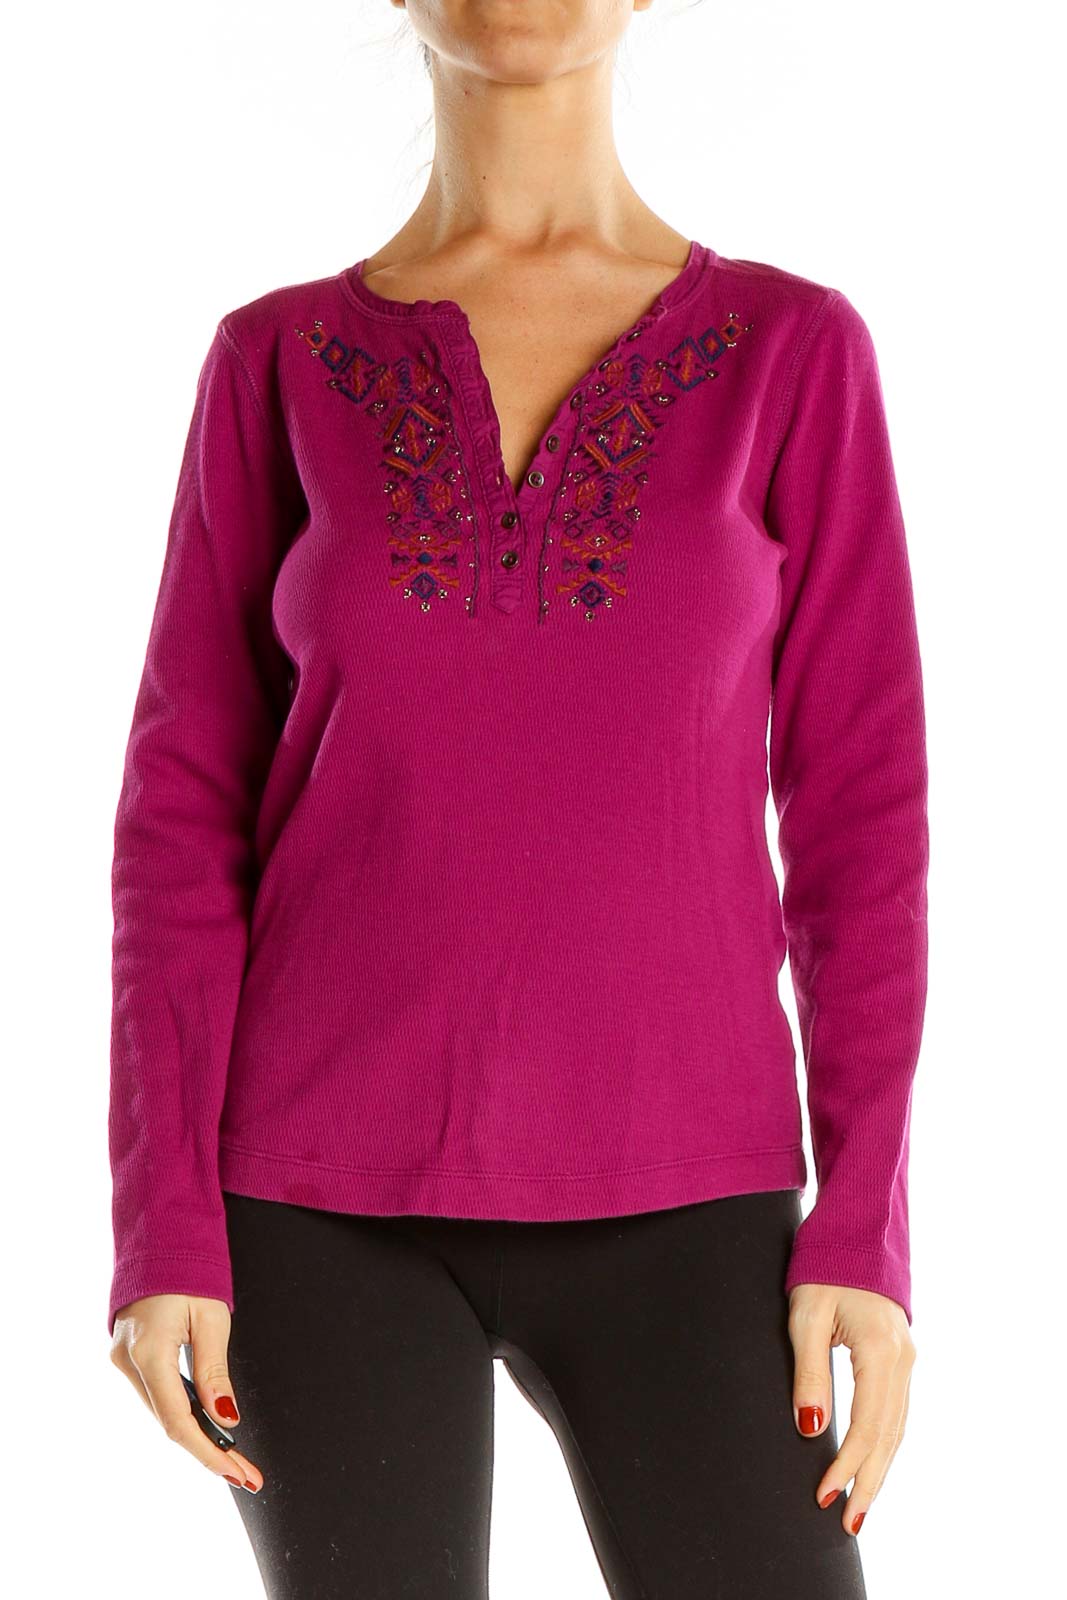 Purple Embroidered Casual Top Front